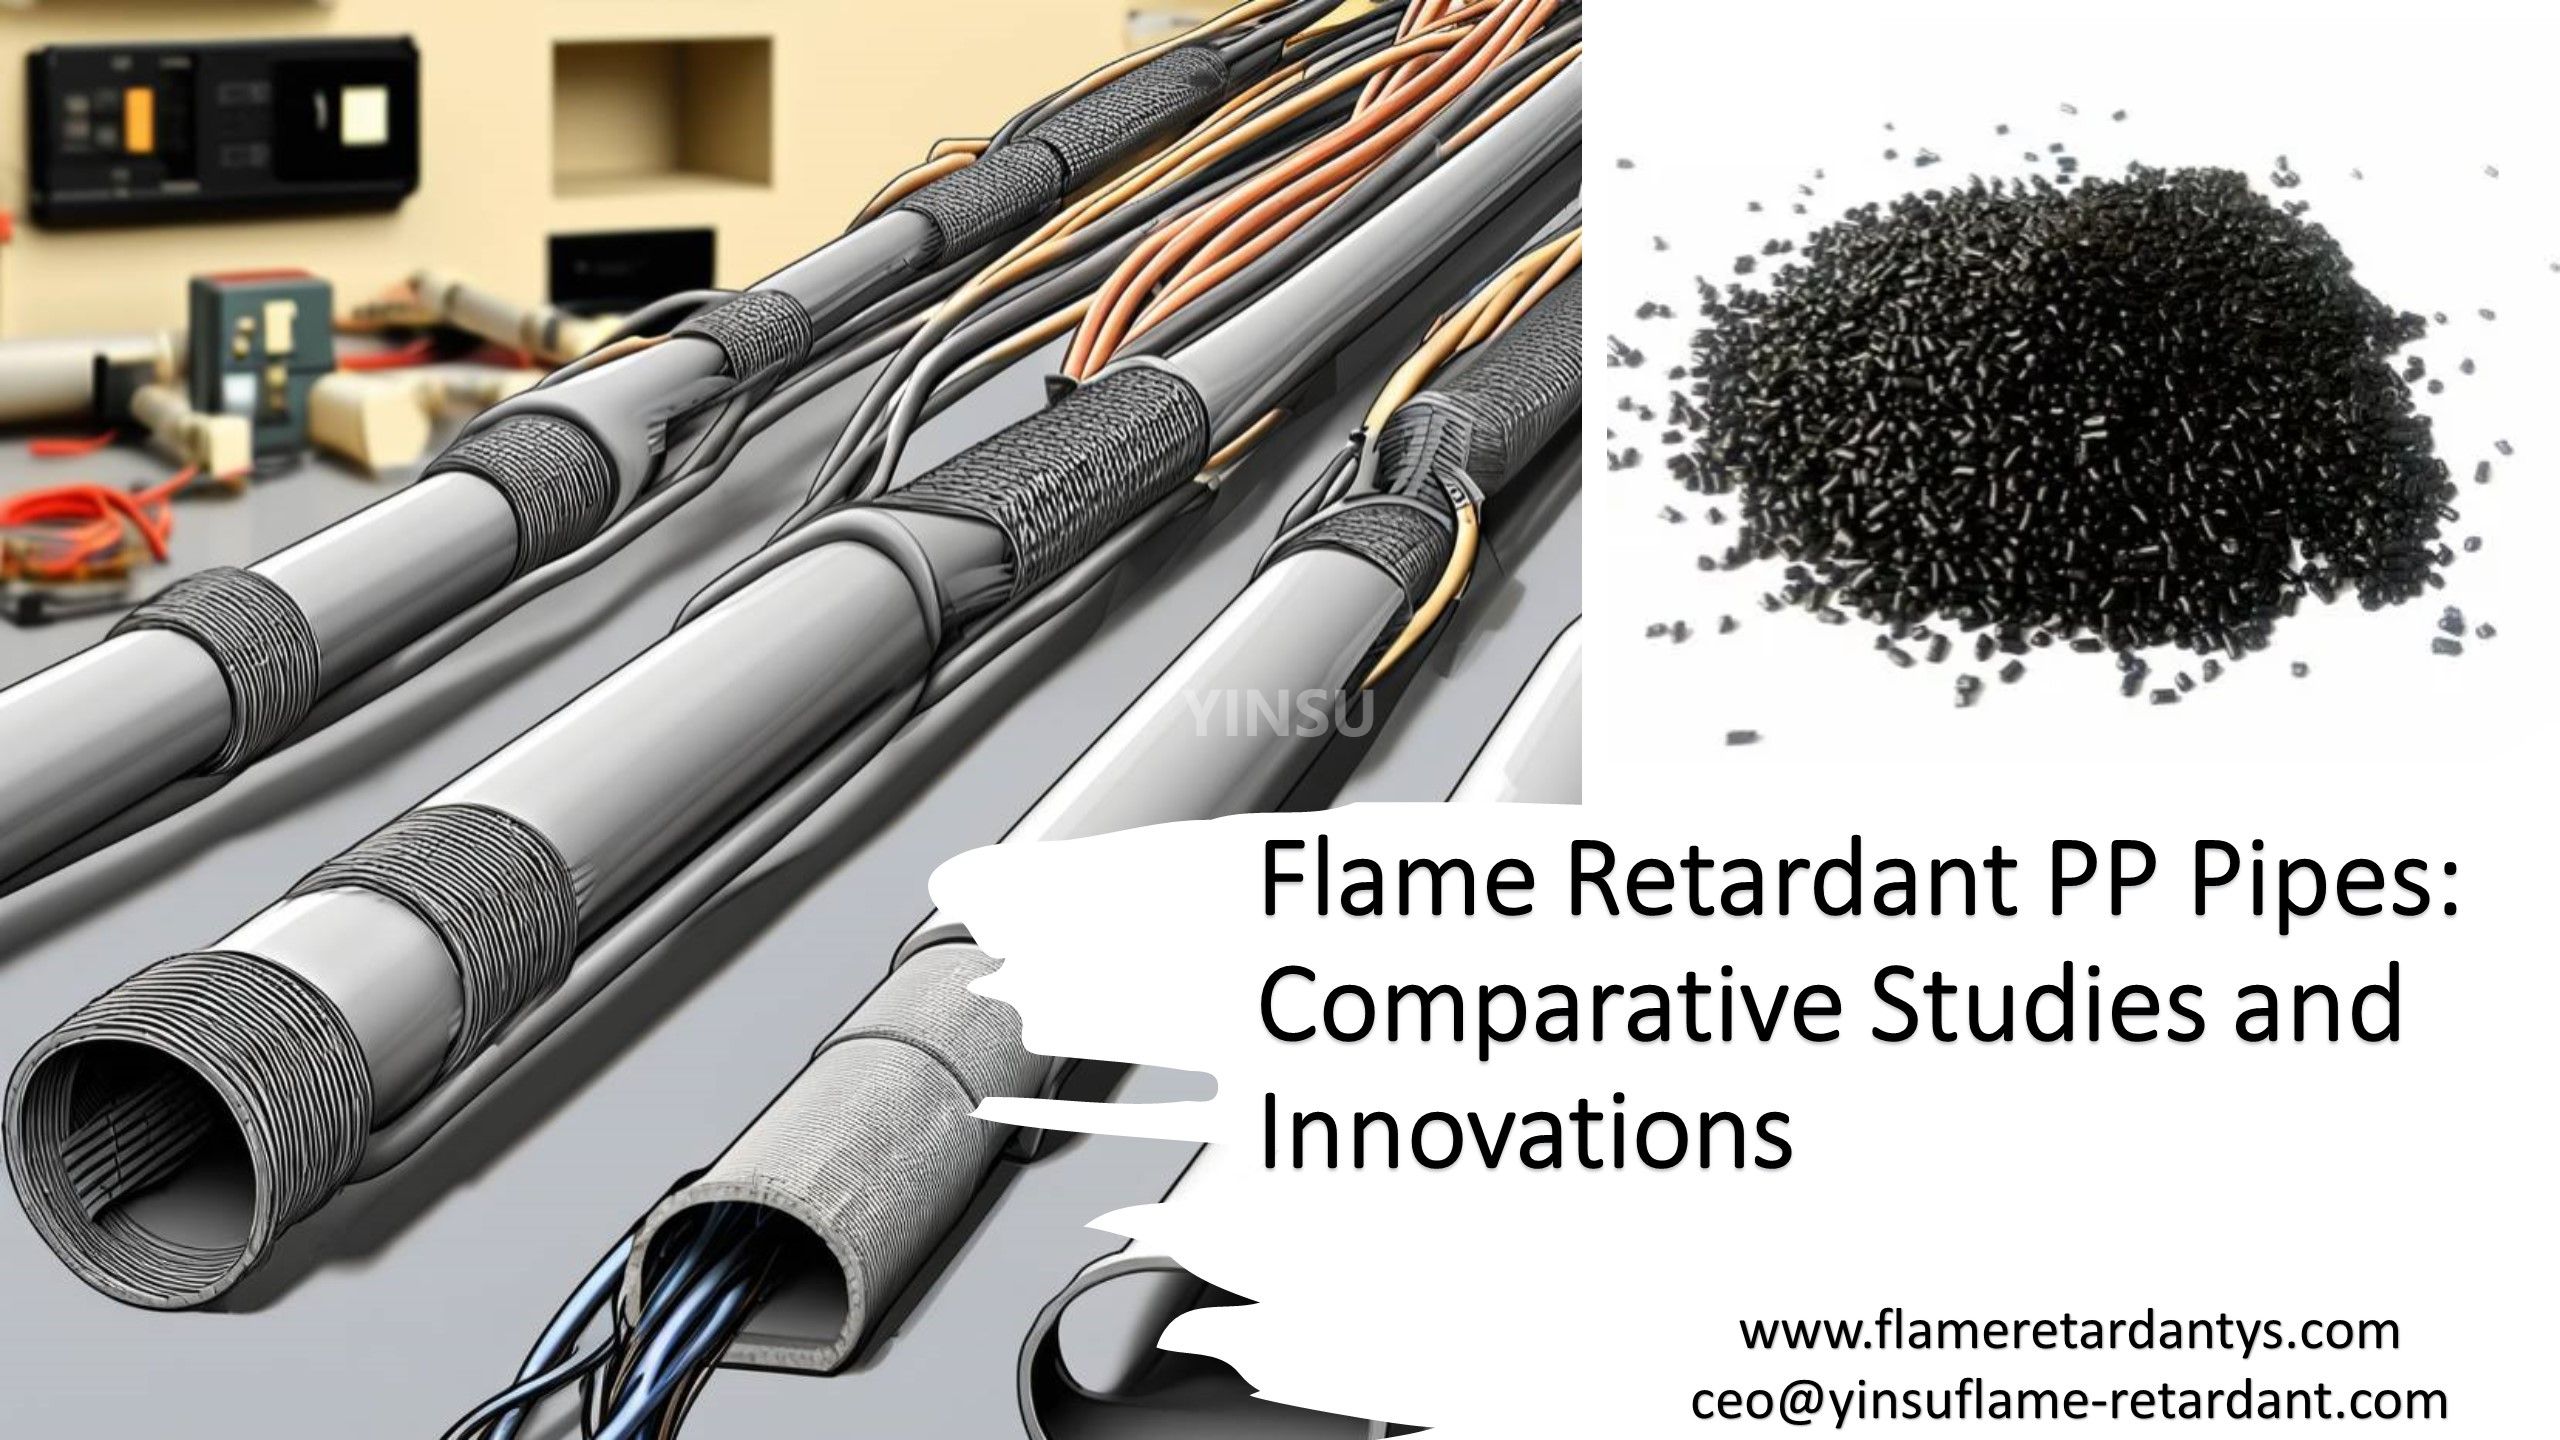 Flame Retardant PP Pipes: Comparative Studies and Innovations